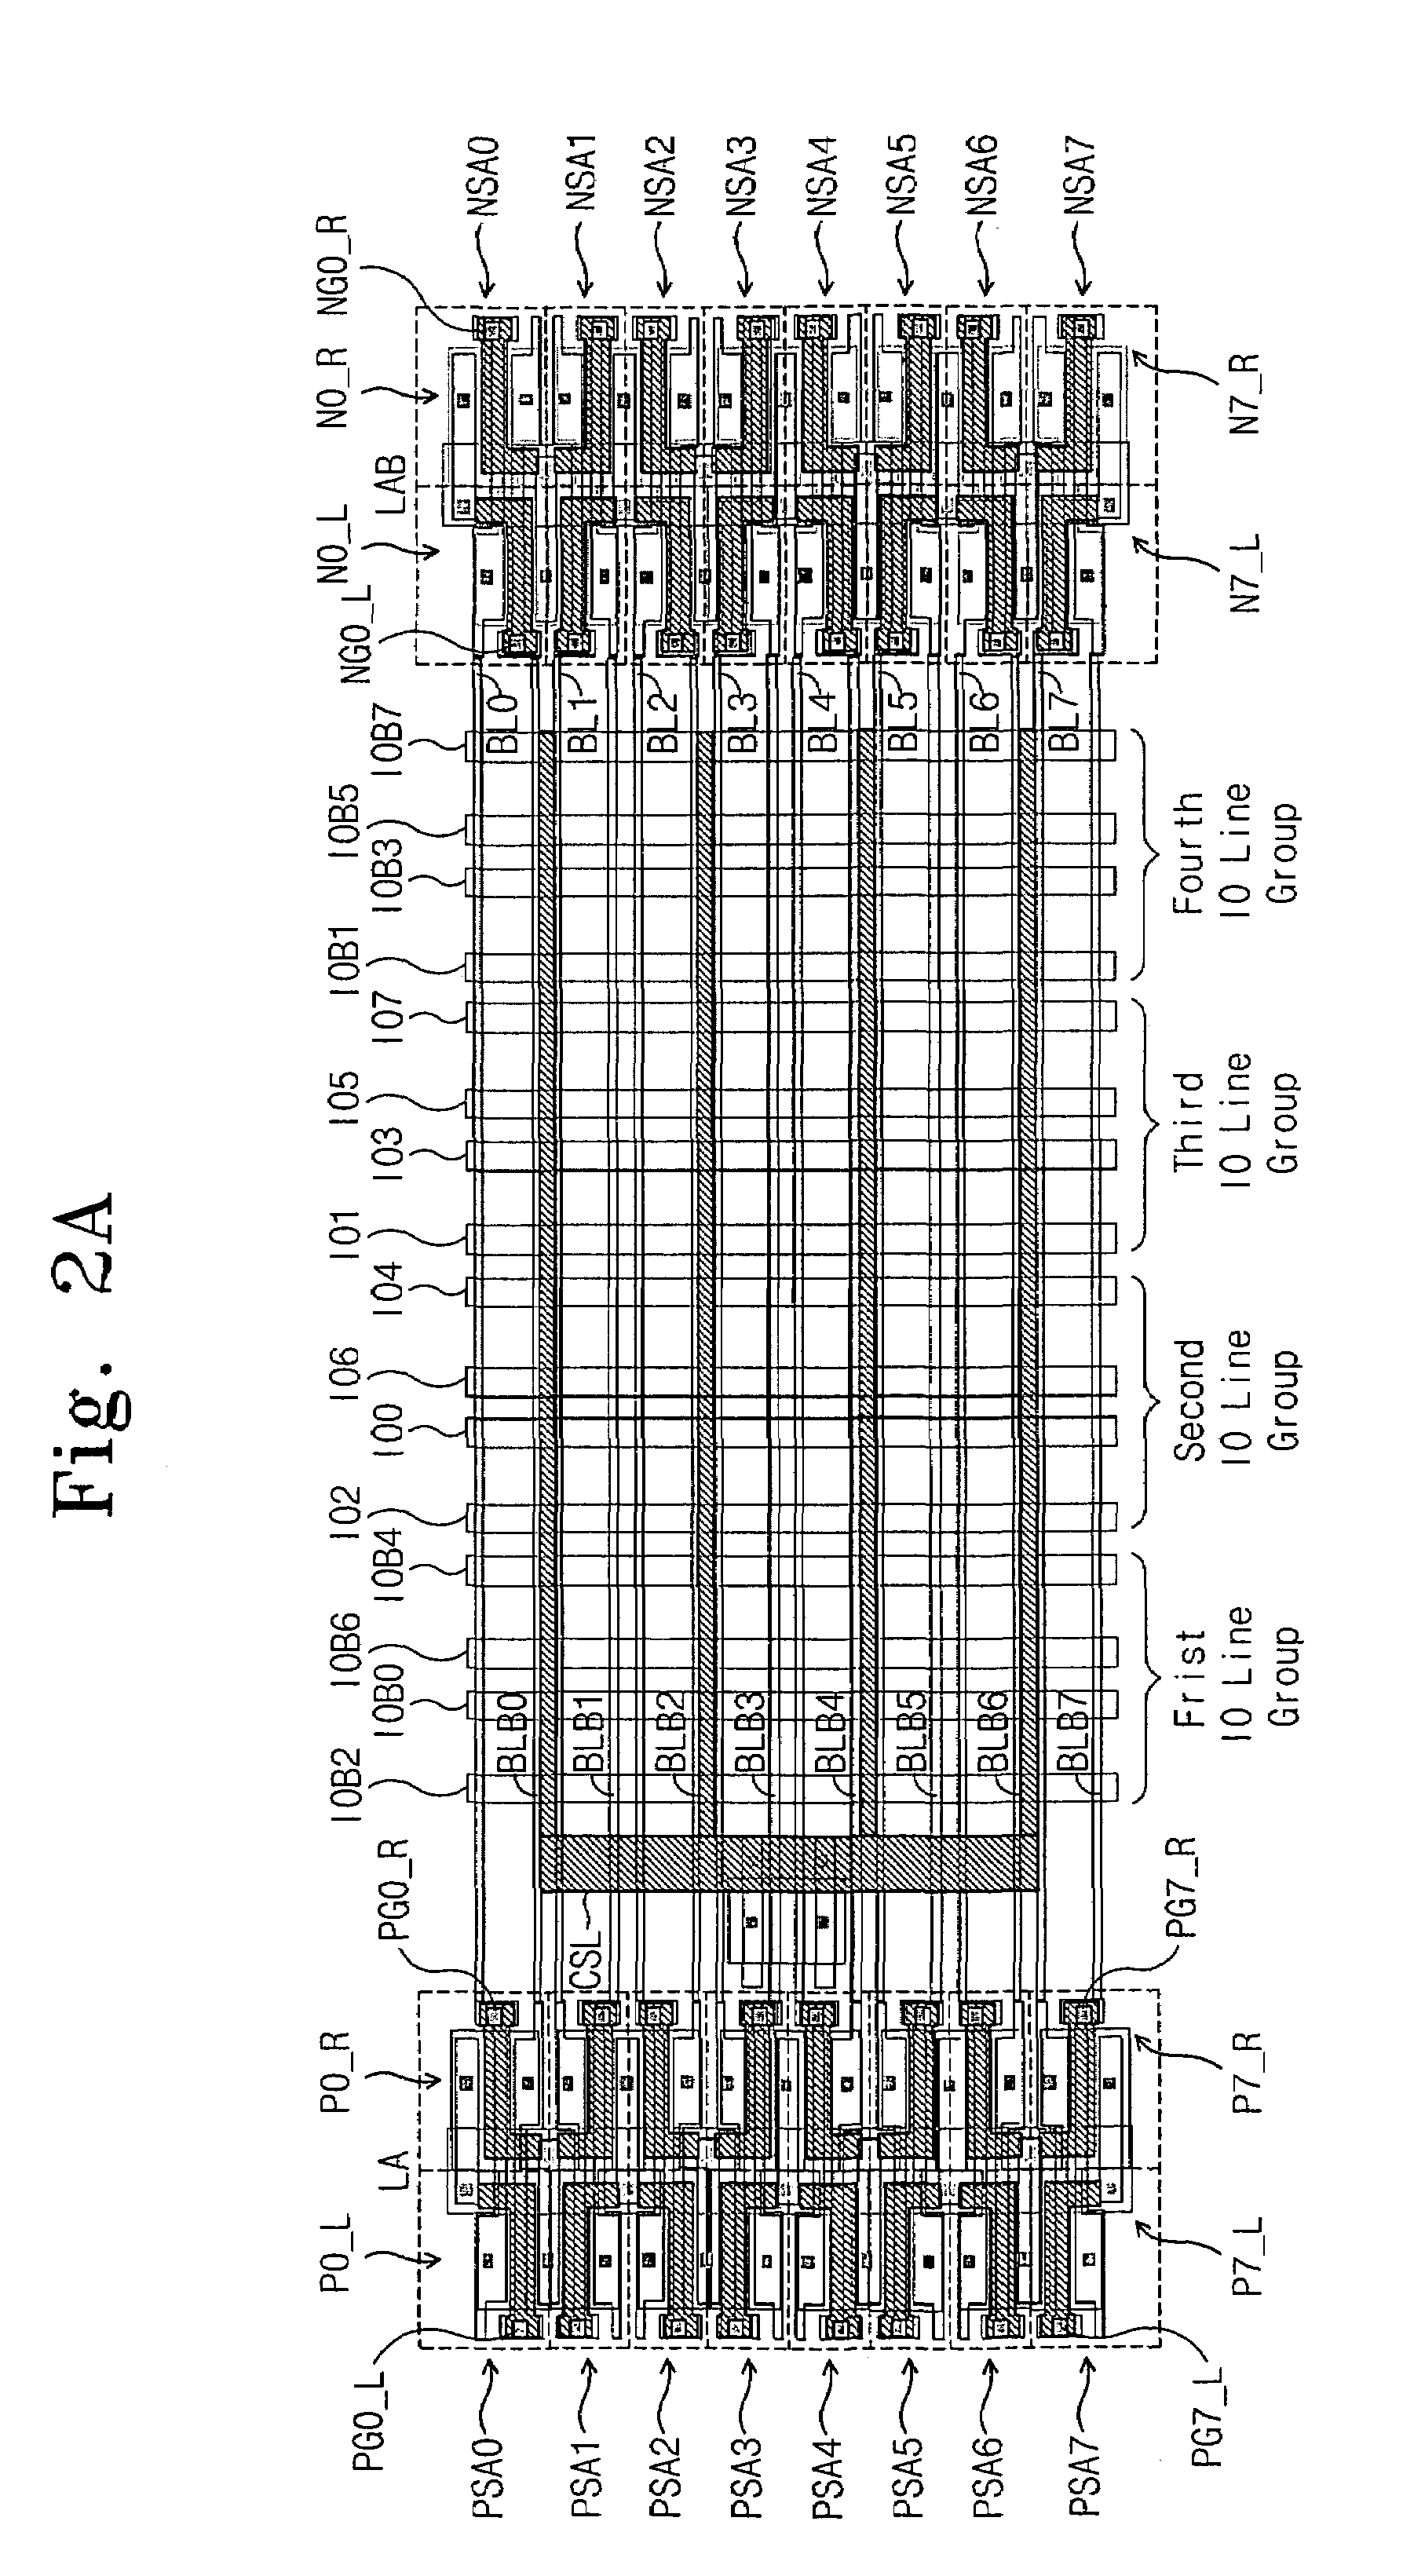 Layout structure of bit line sense amplifier of semiconductor memory device